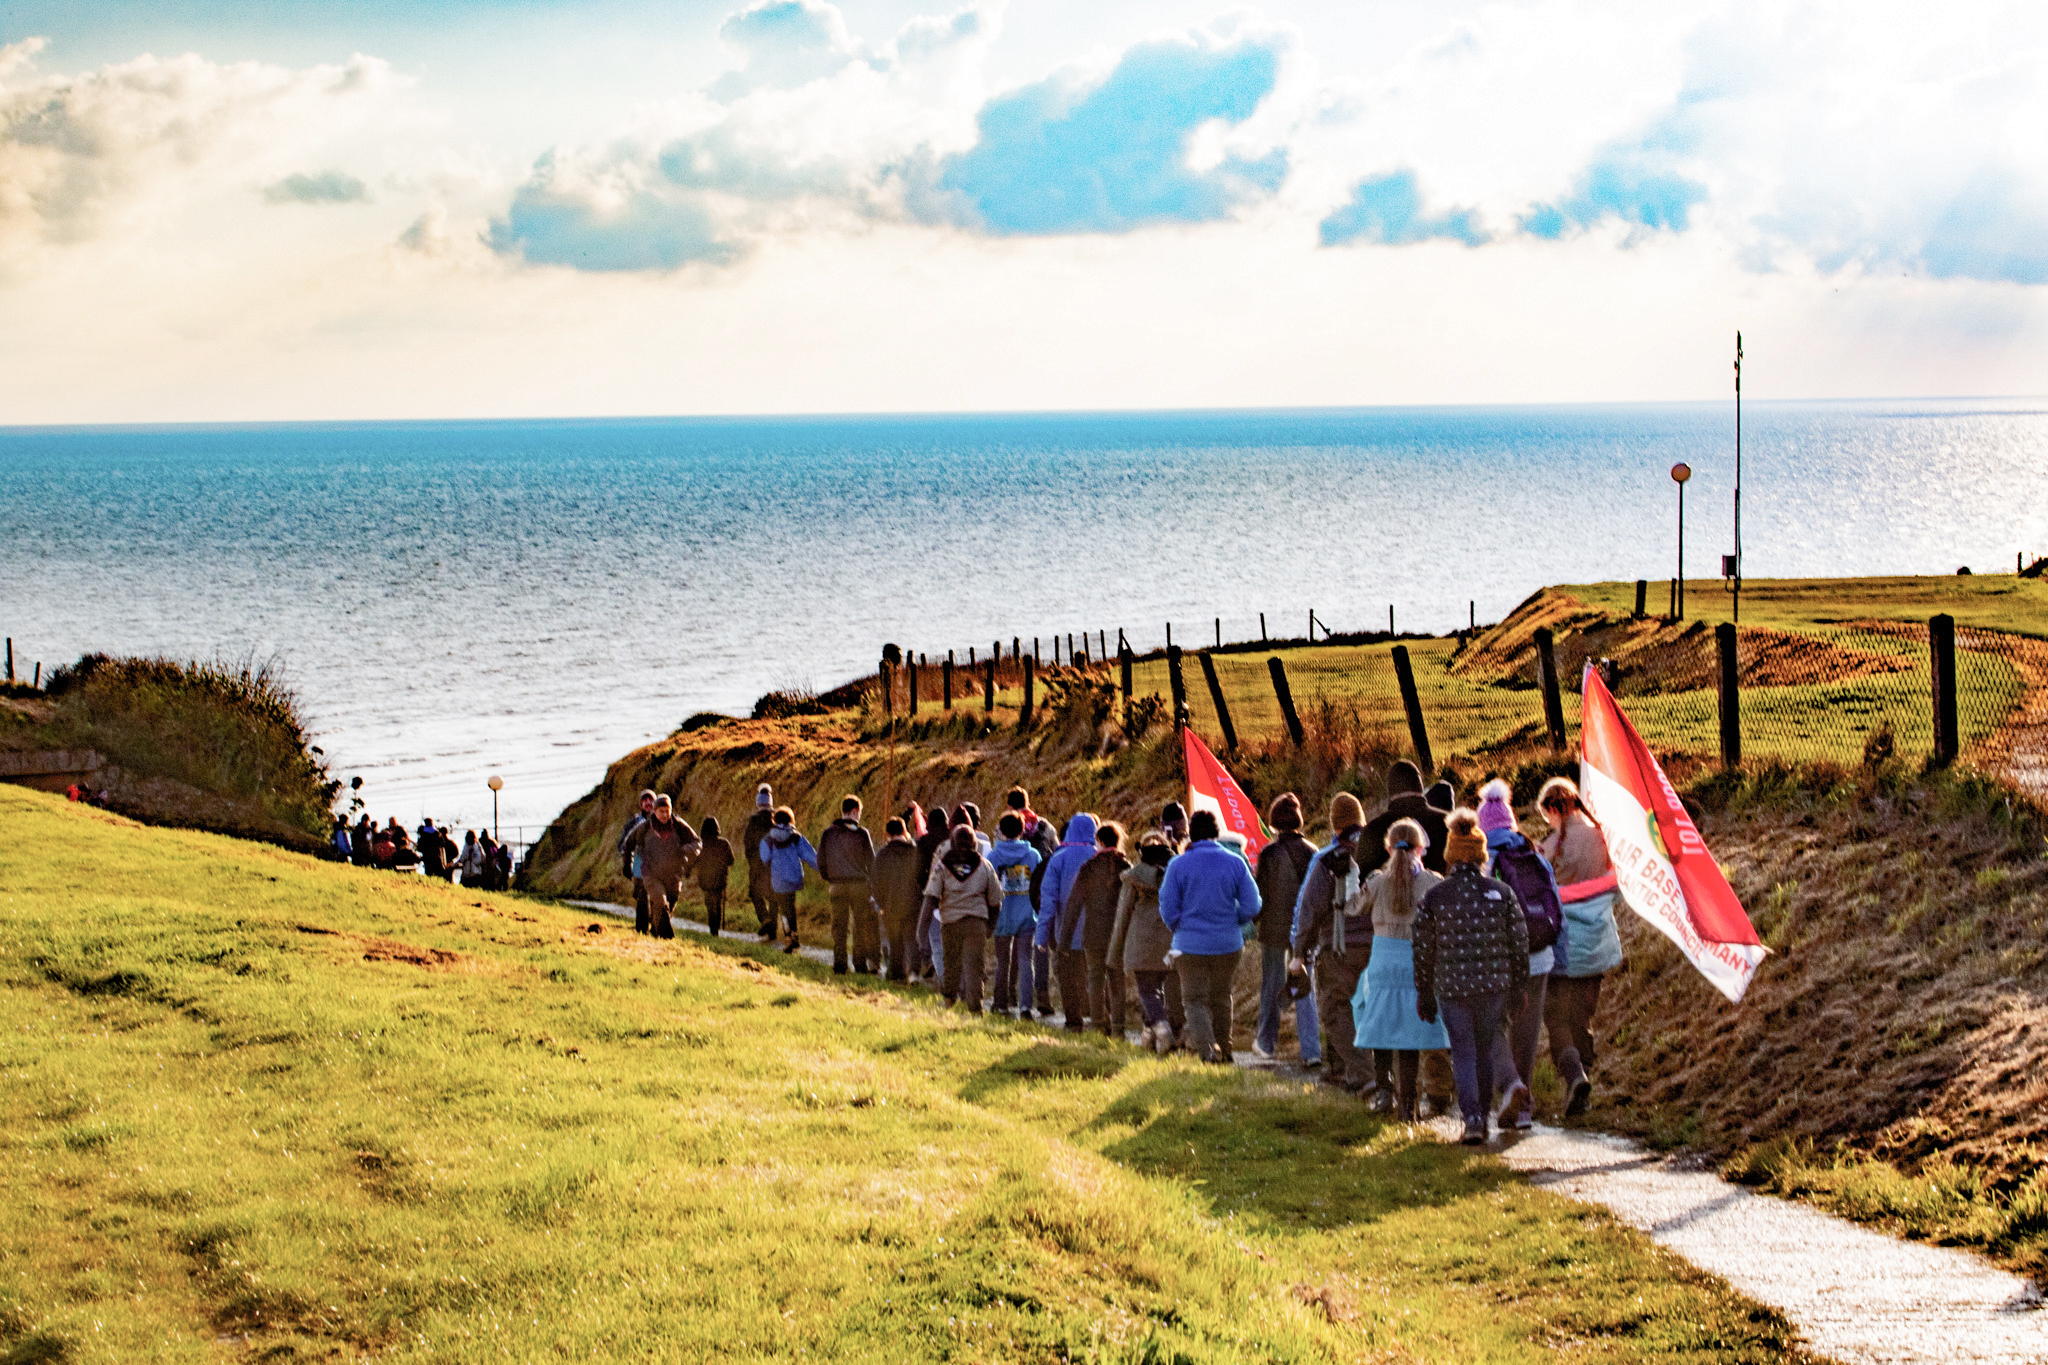 How the Normandy Camporee helps the Transatlantic Council fulfill its role as custodians of Omaha Beach